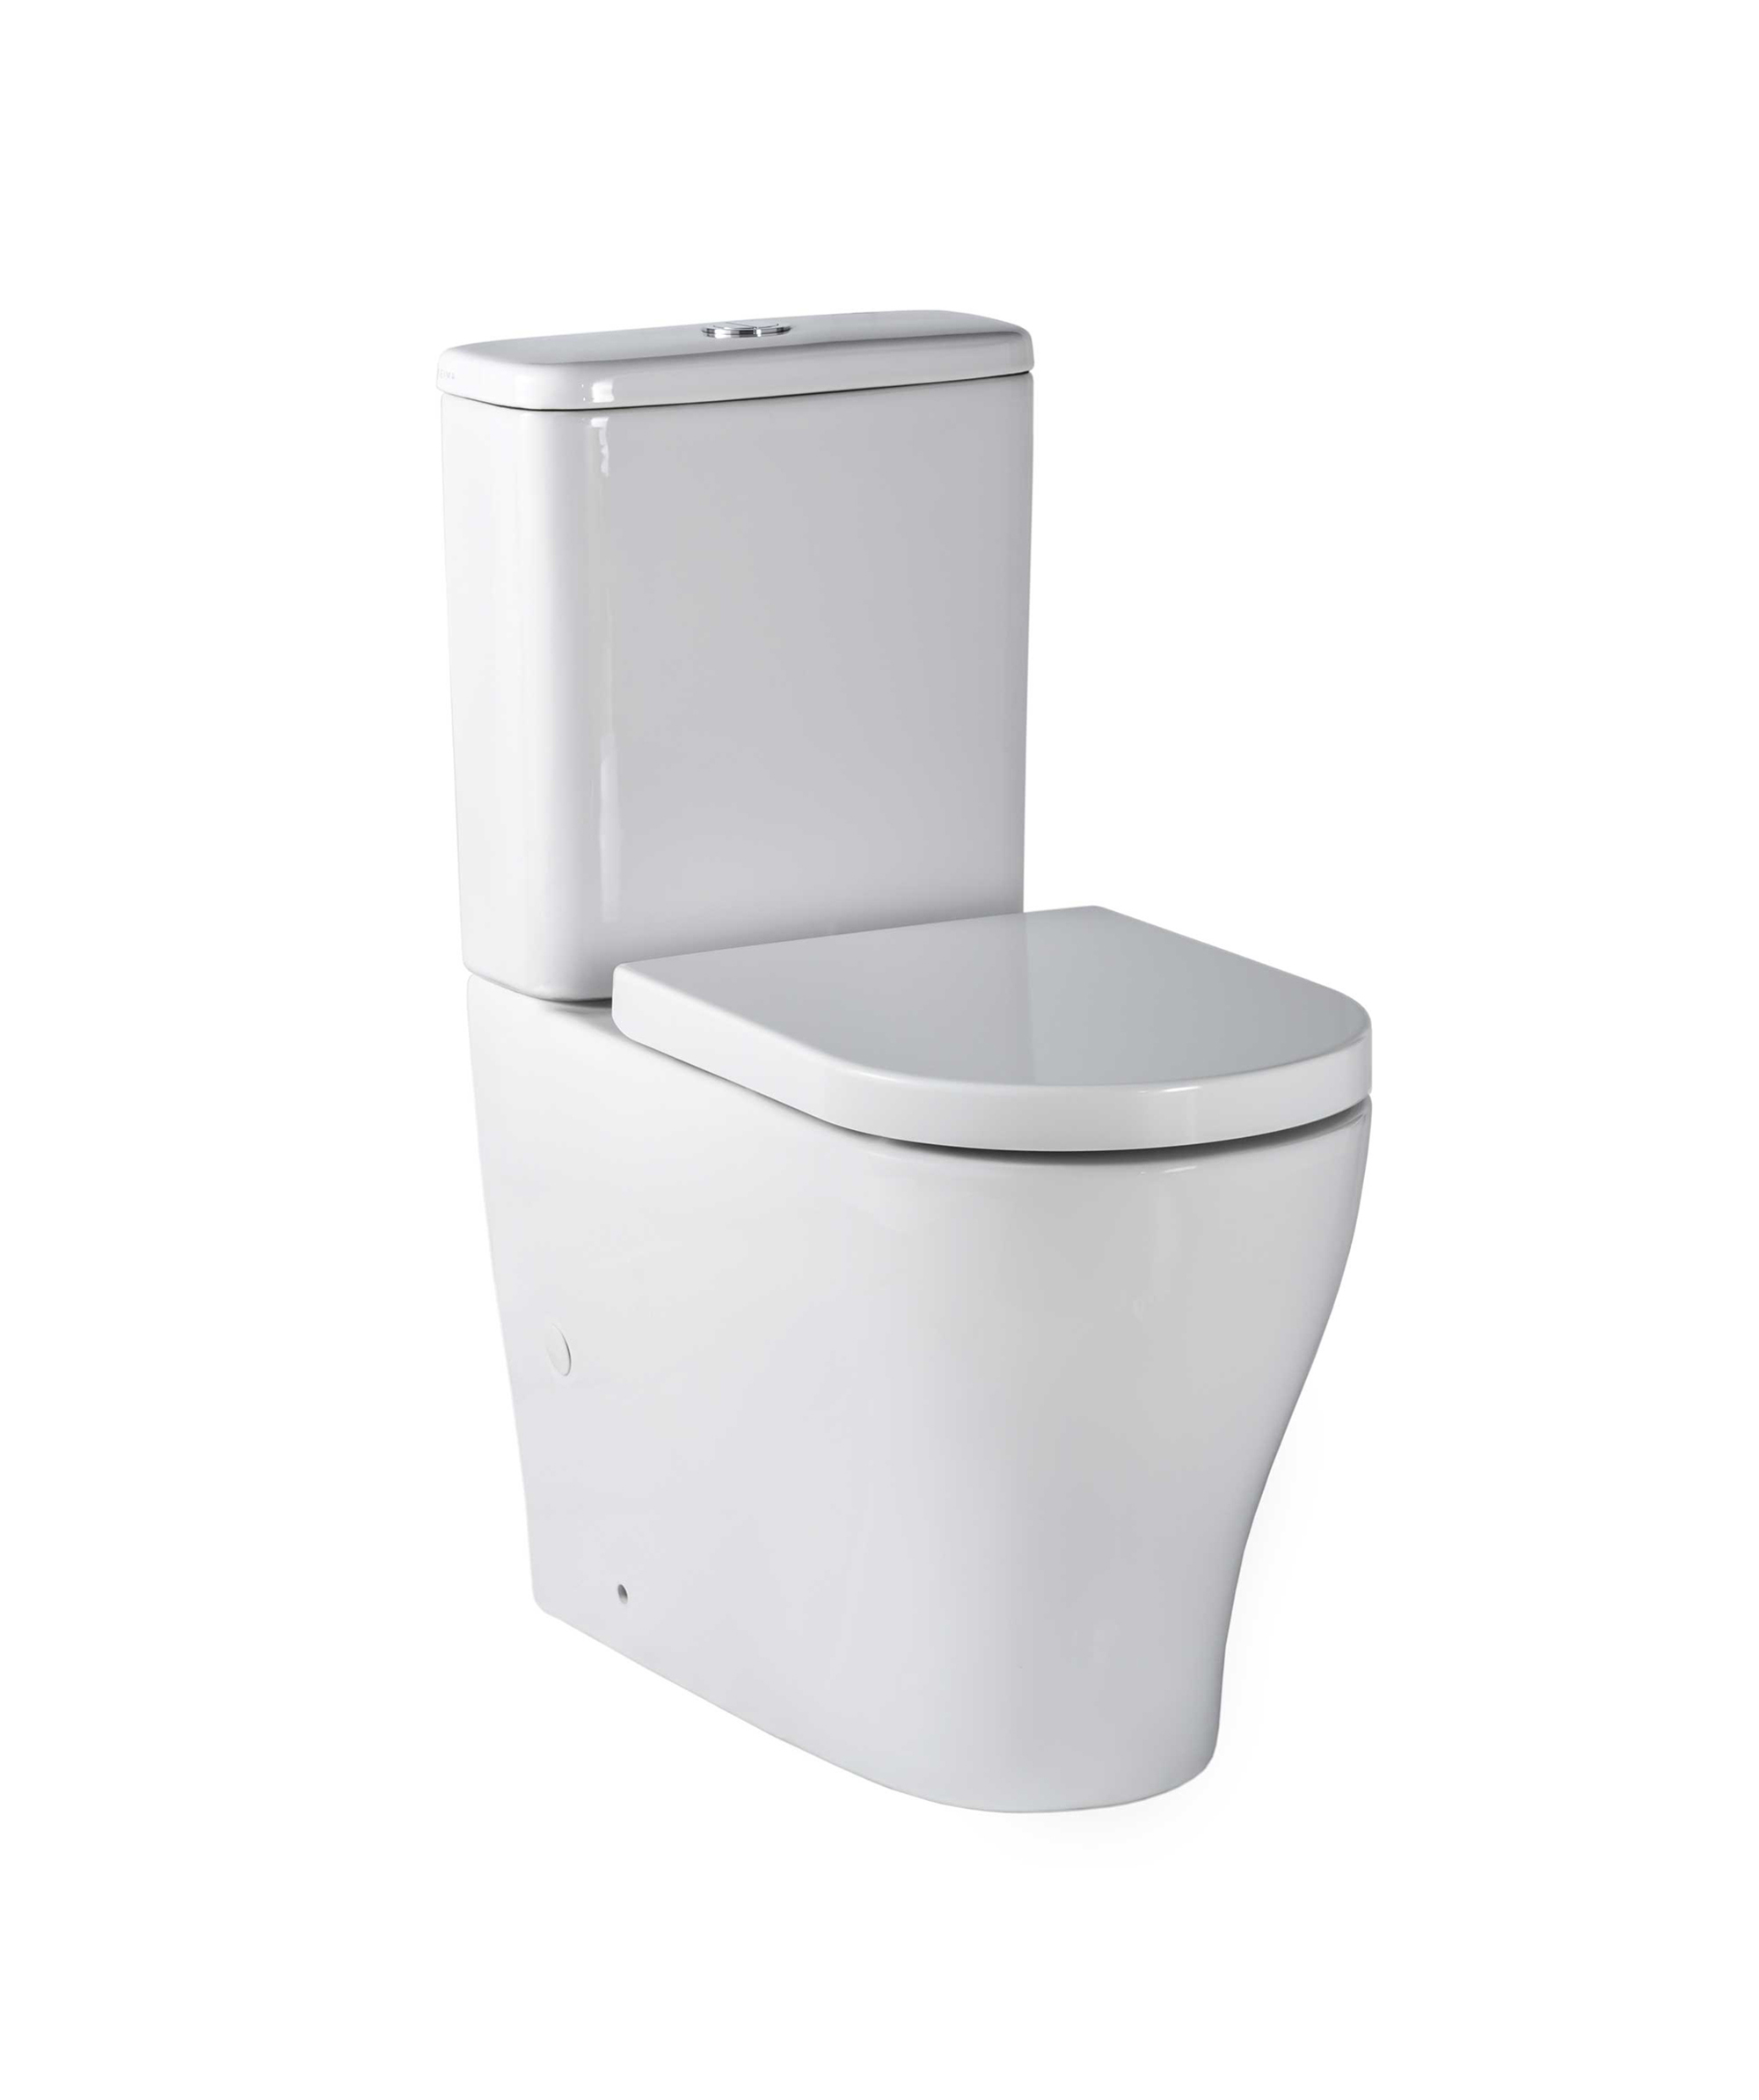 Limni Wall Faced toilet suite - choice of seats